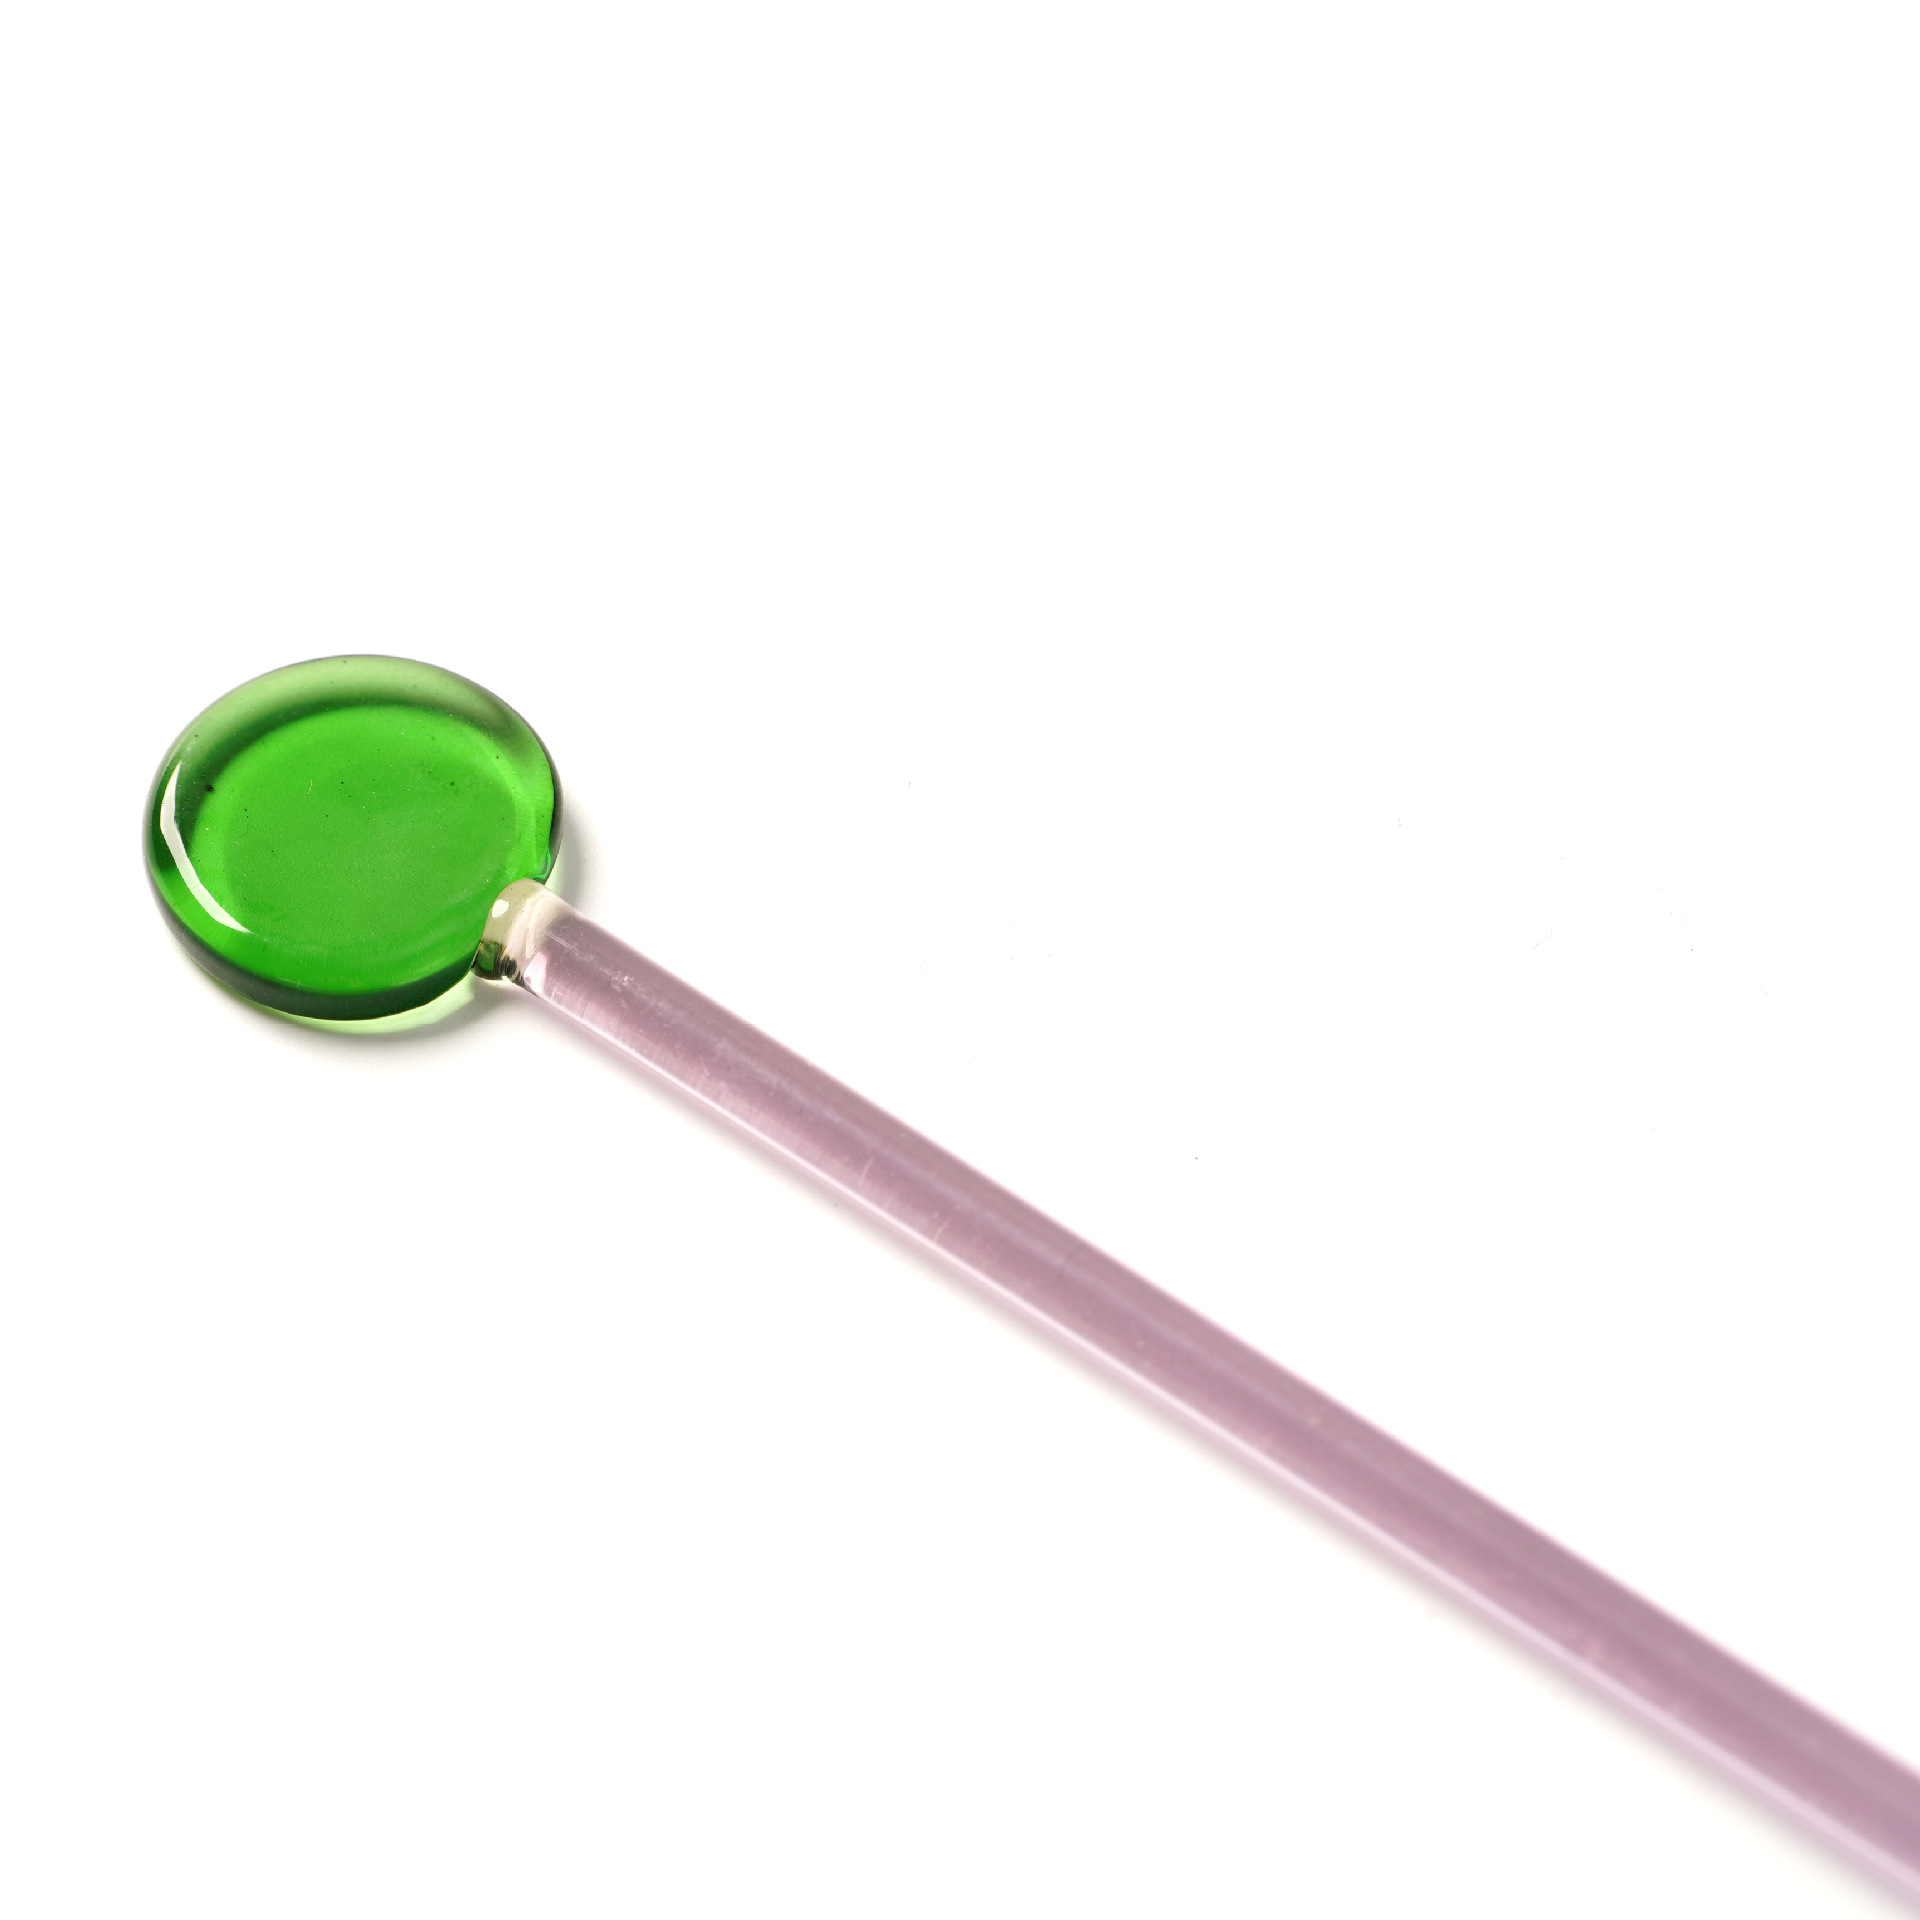 Lollipop cocktail stirring rod green and purple